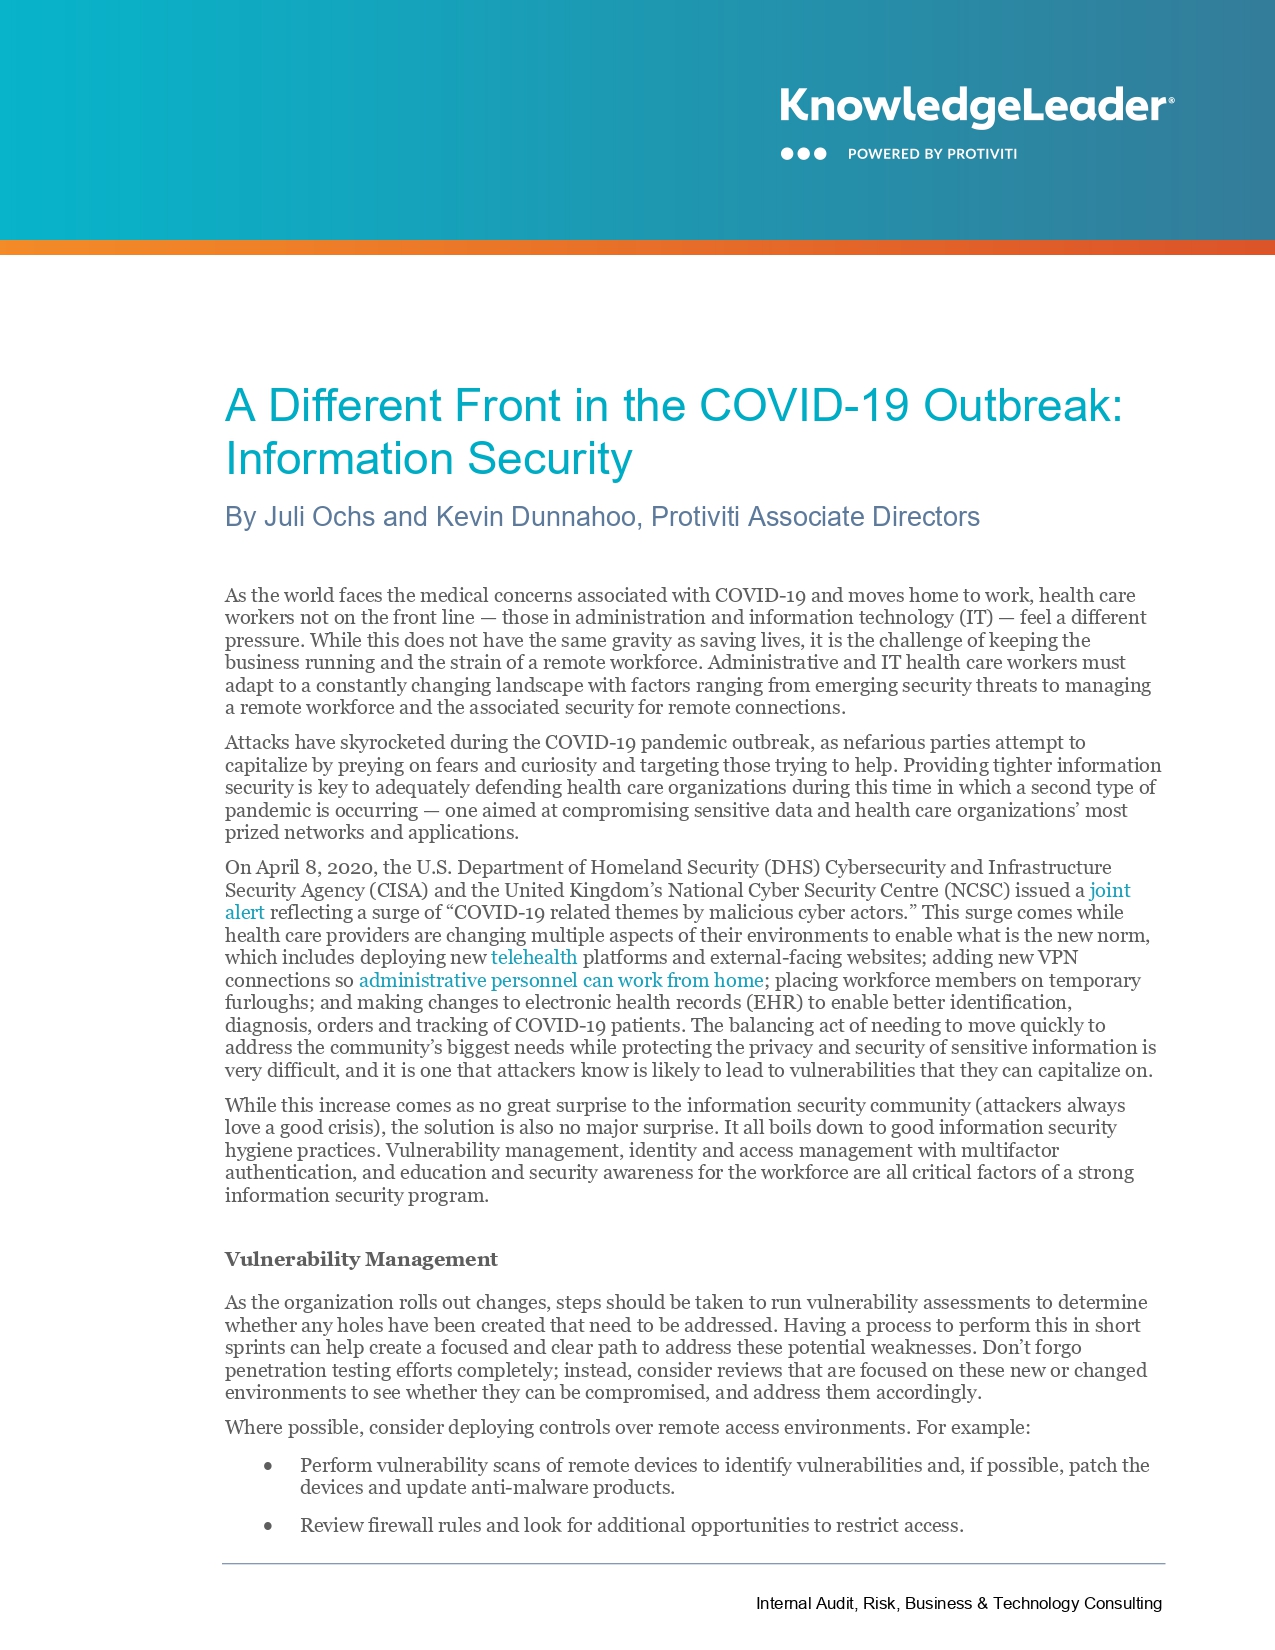 A Different Front in the COVID-19 Outbreak: Information Security